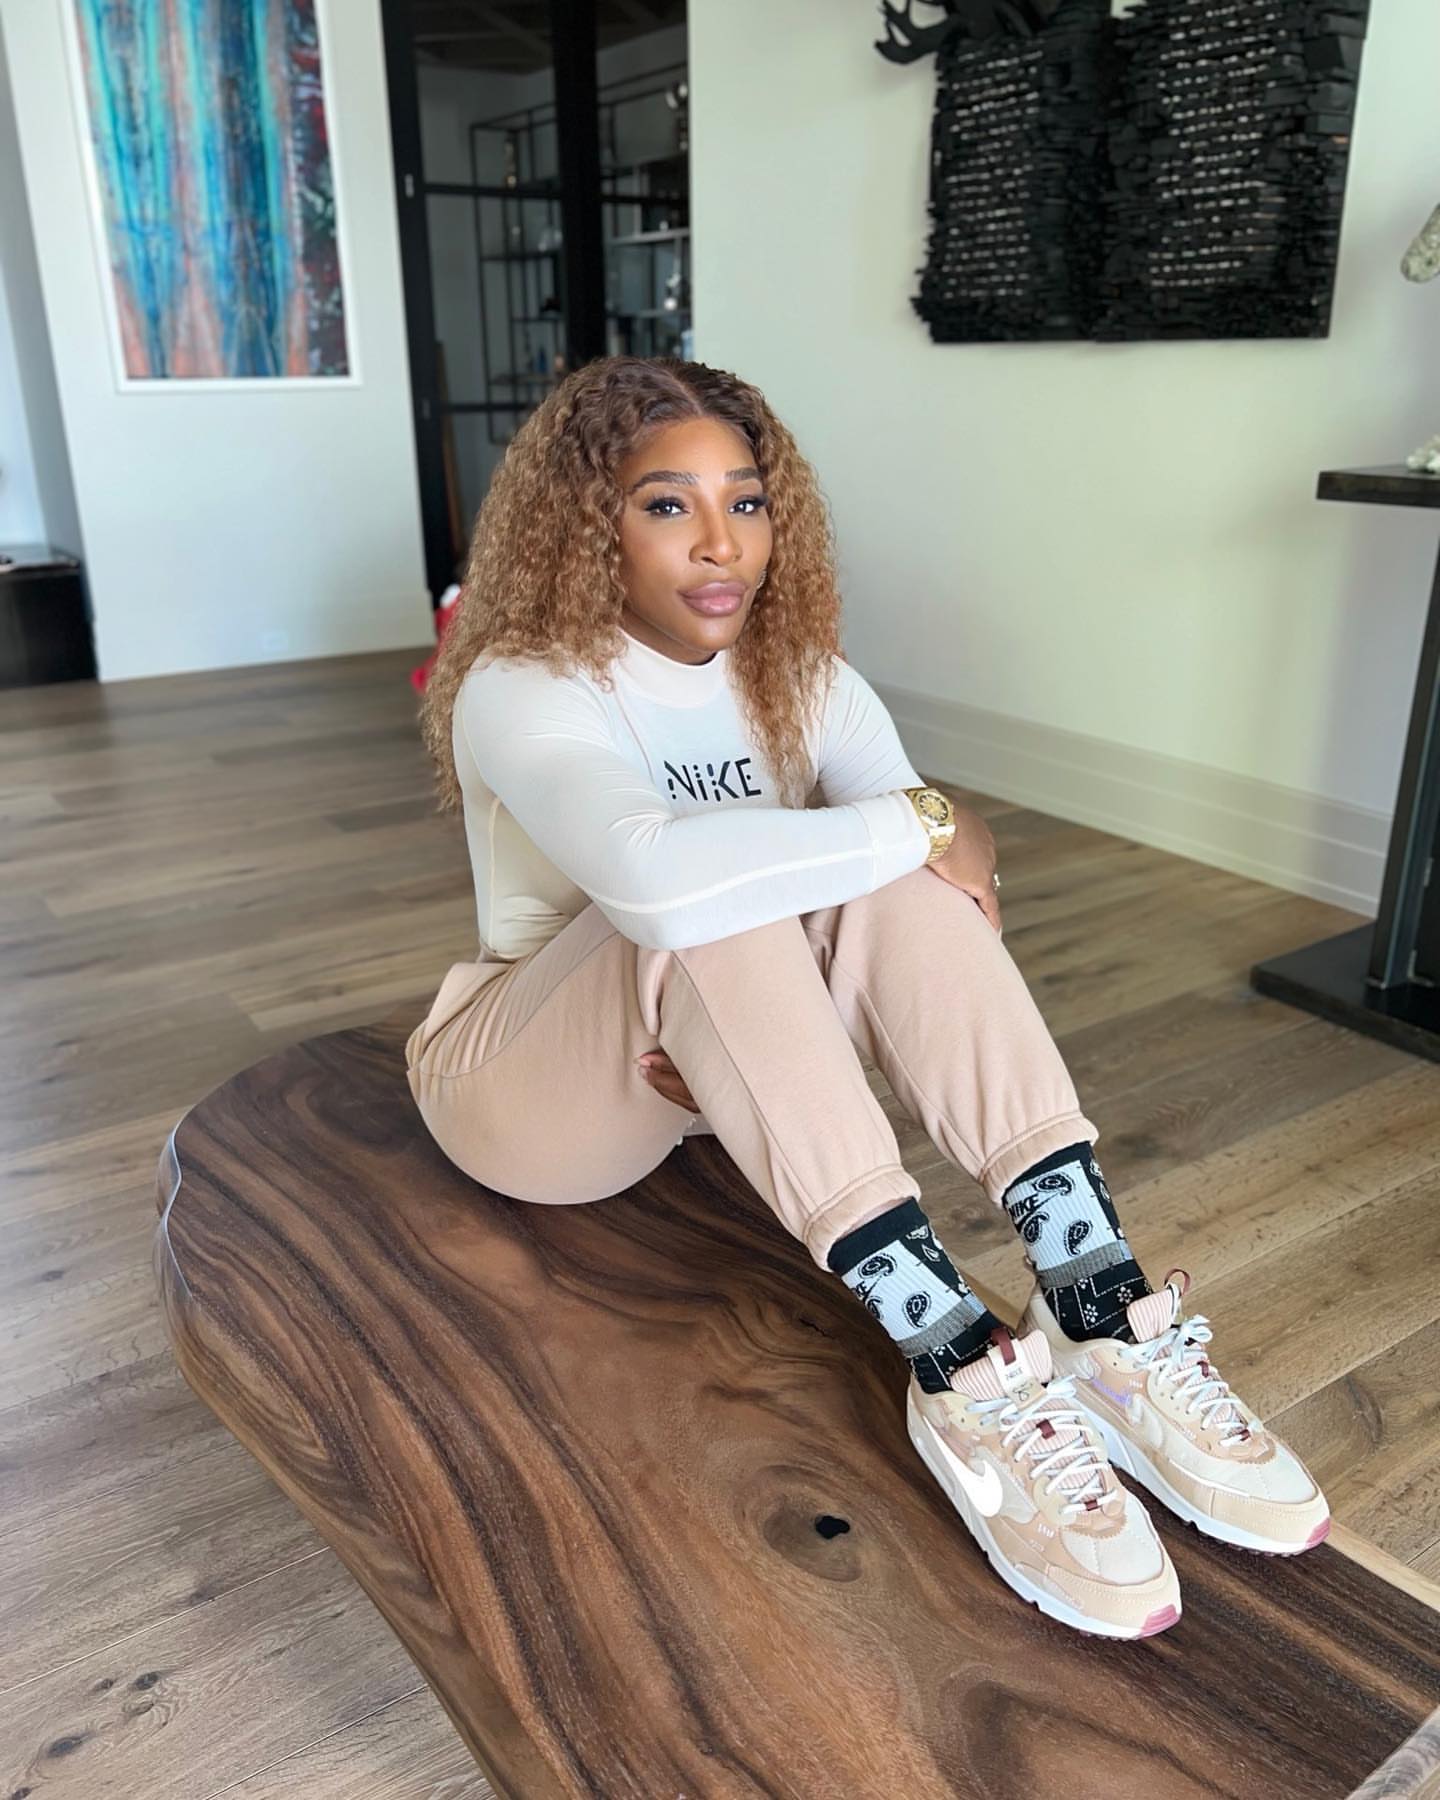 Serena Williams Shares a Pregnancy Workout! - Photo 14